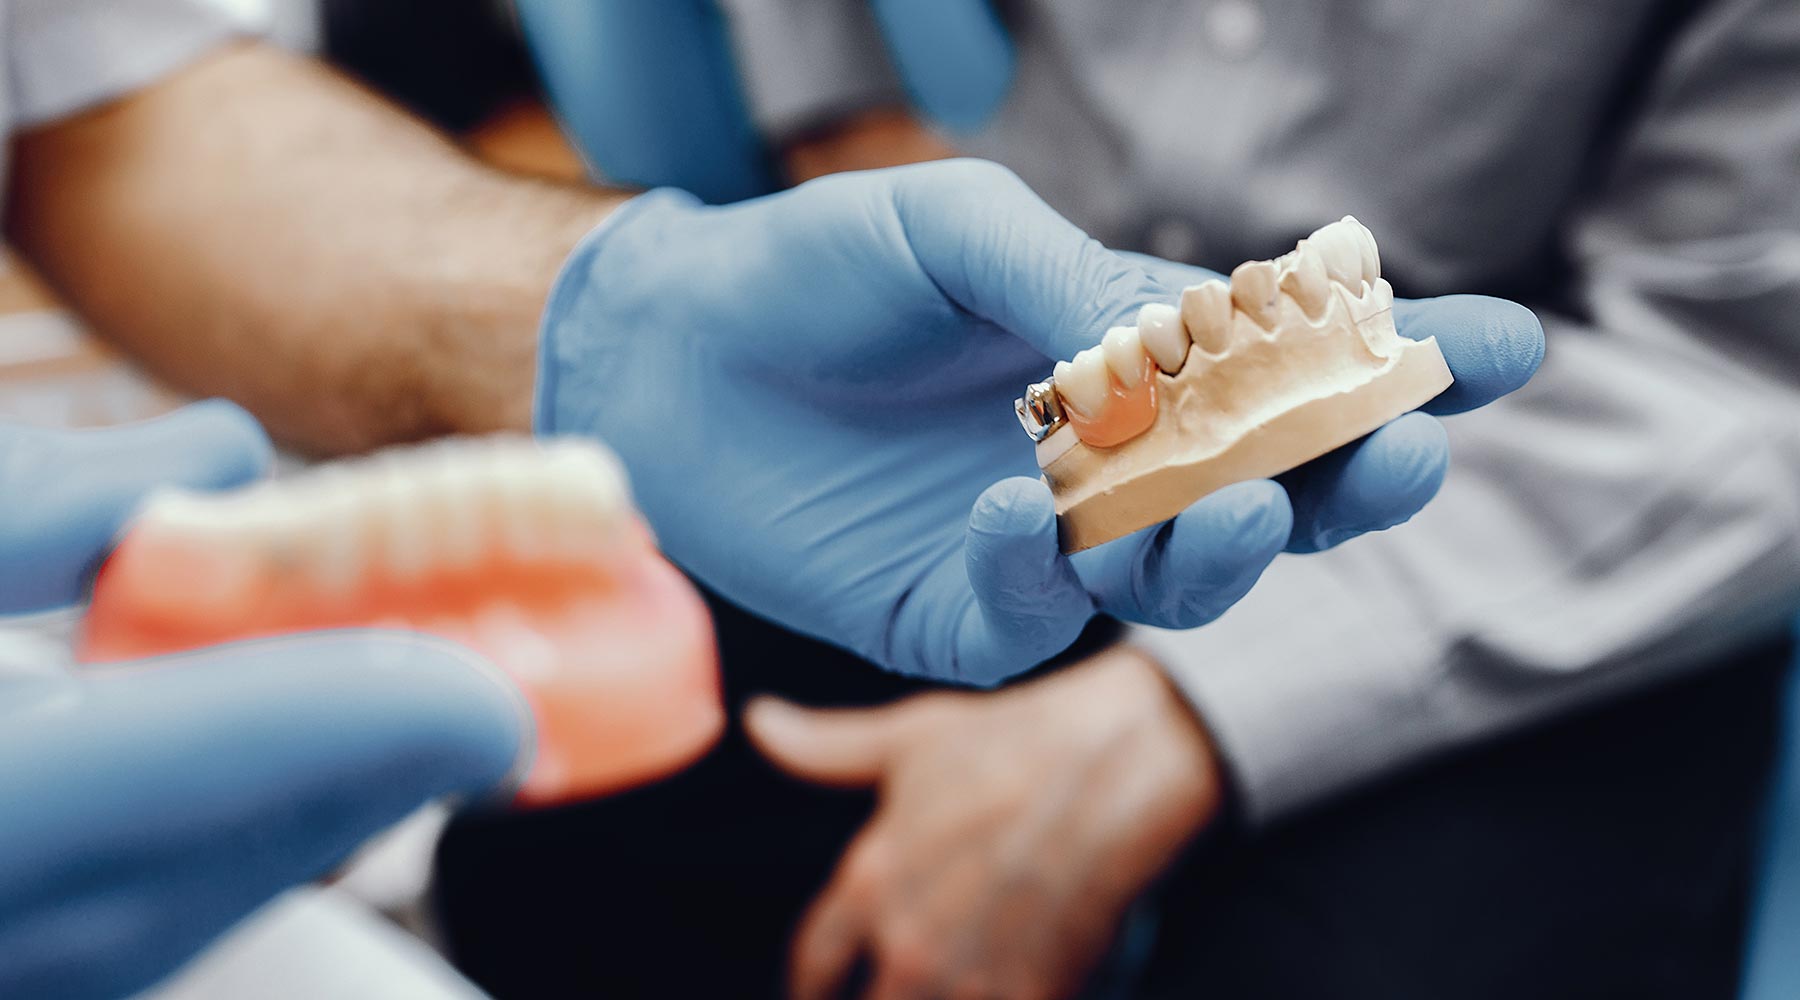 How to find a good private denture technician